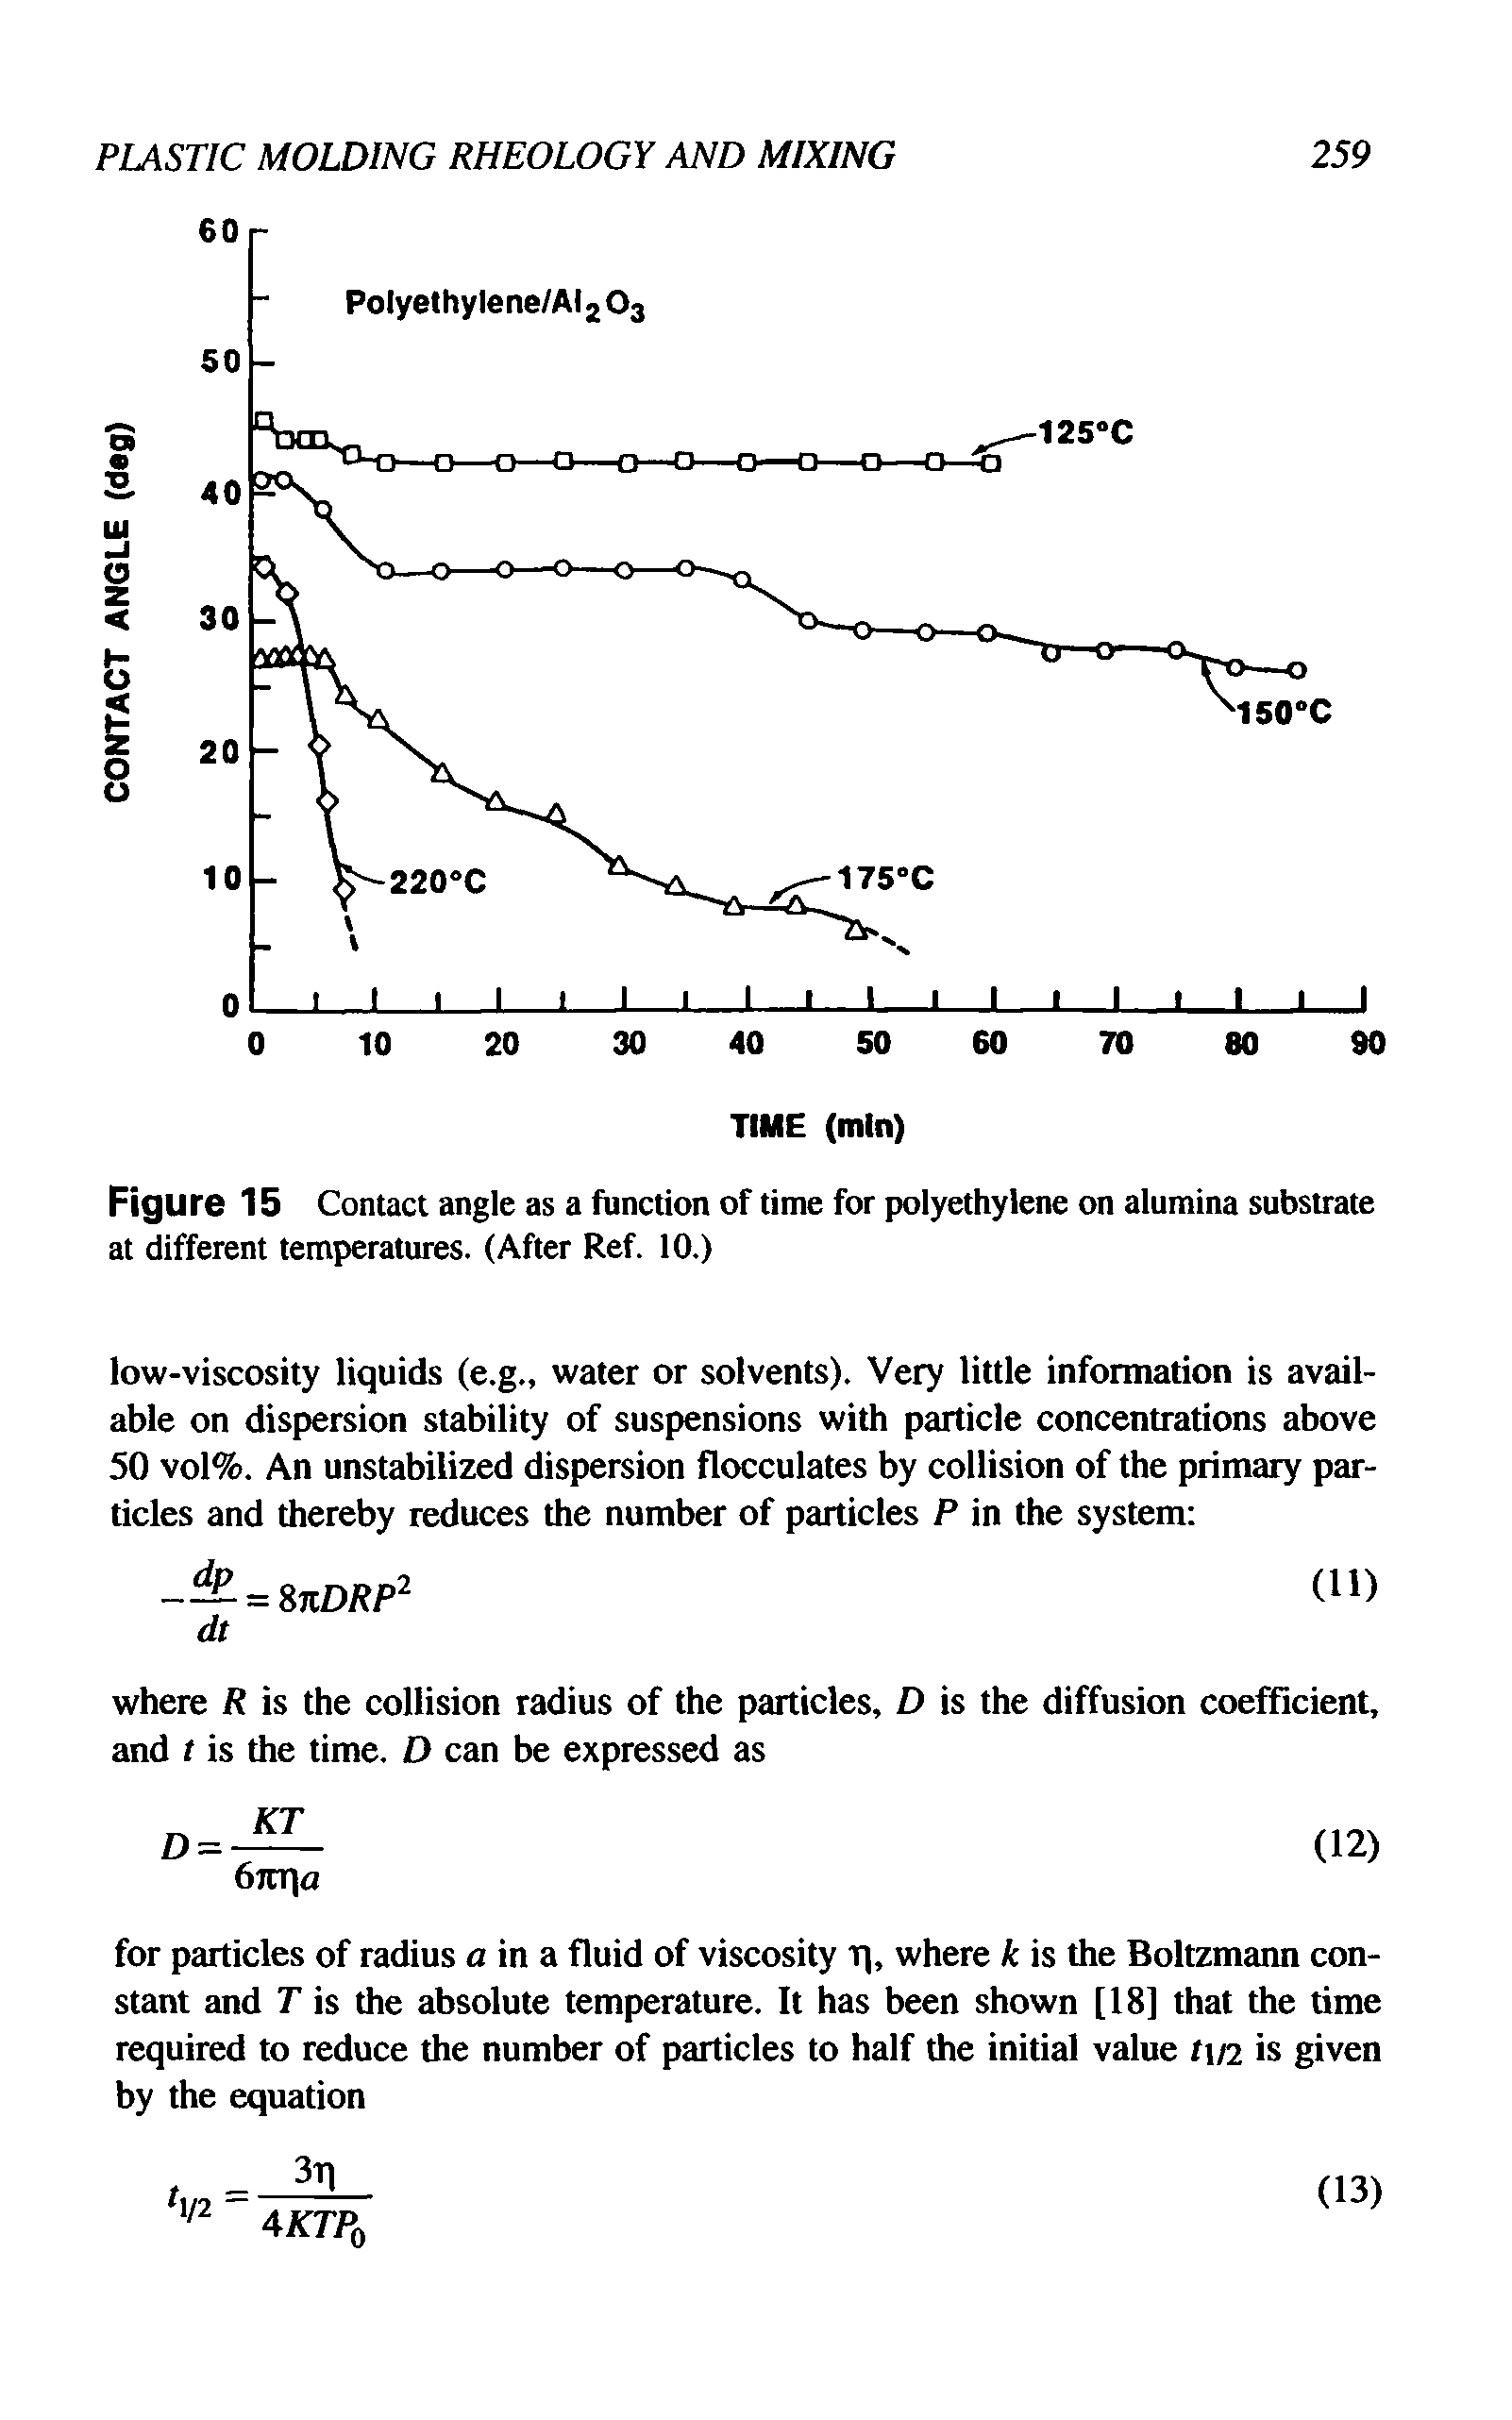 Figure 15 Contact angle as a function of time for polyethylene on alumina substrate at different temperatures. (After Ref. 10.)...